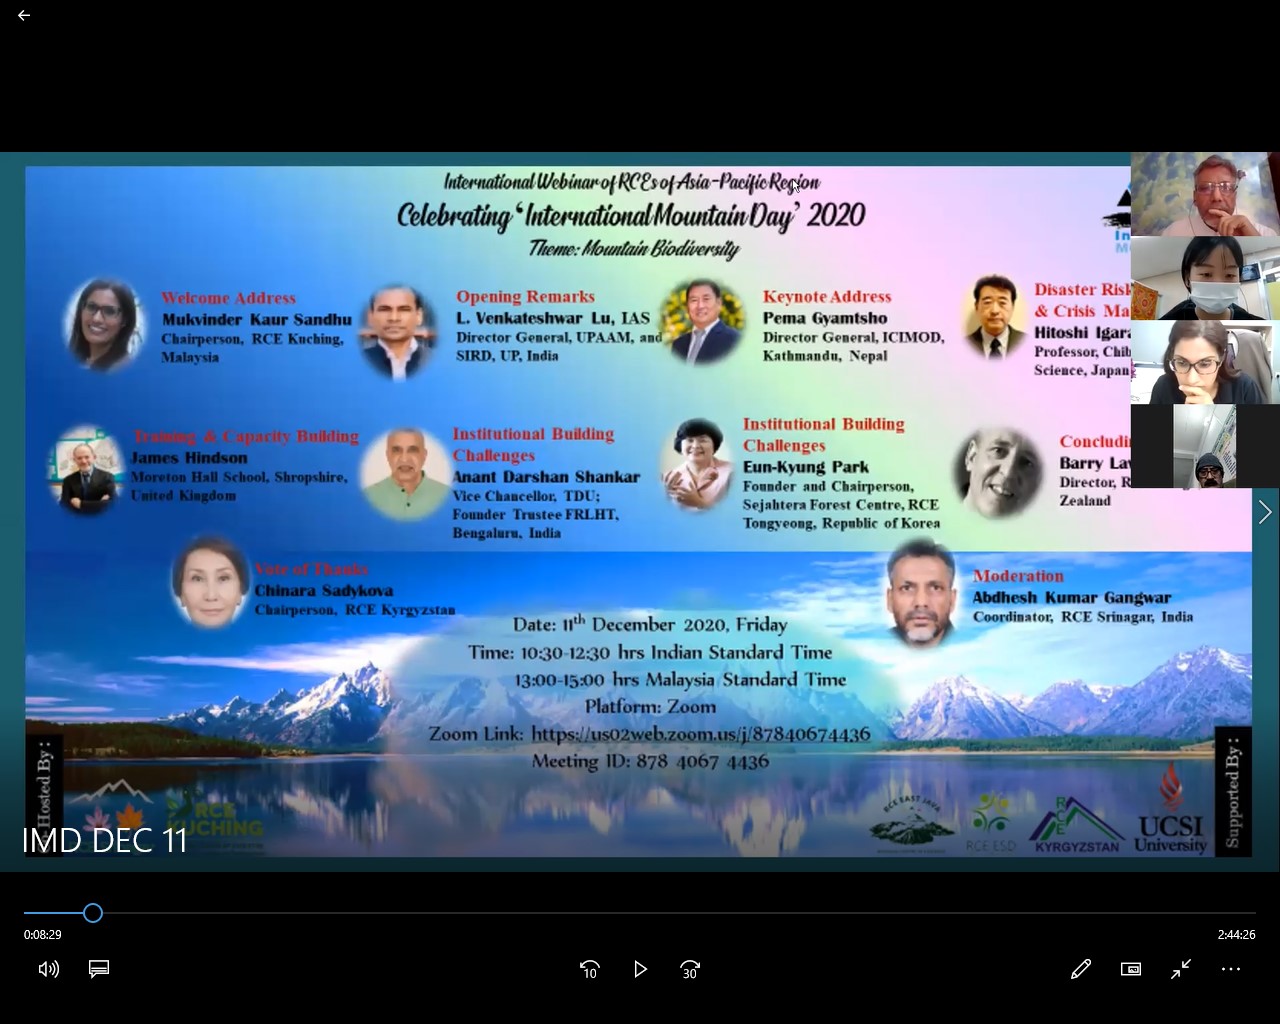 You are currently viewing International Webinar of RCEs of Asia Pacific Region Celebrating “International Mountain Day 2020”